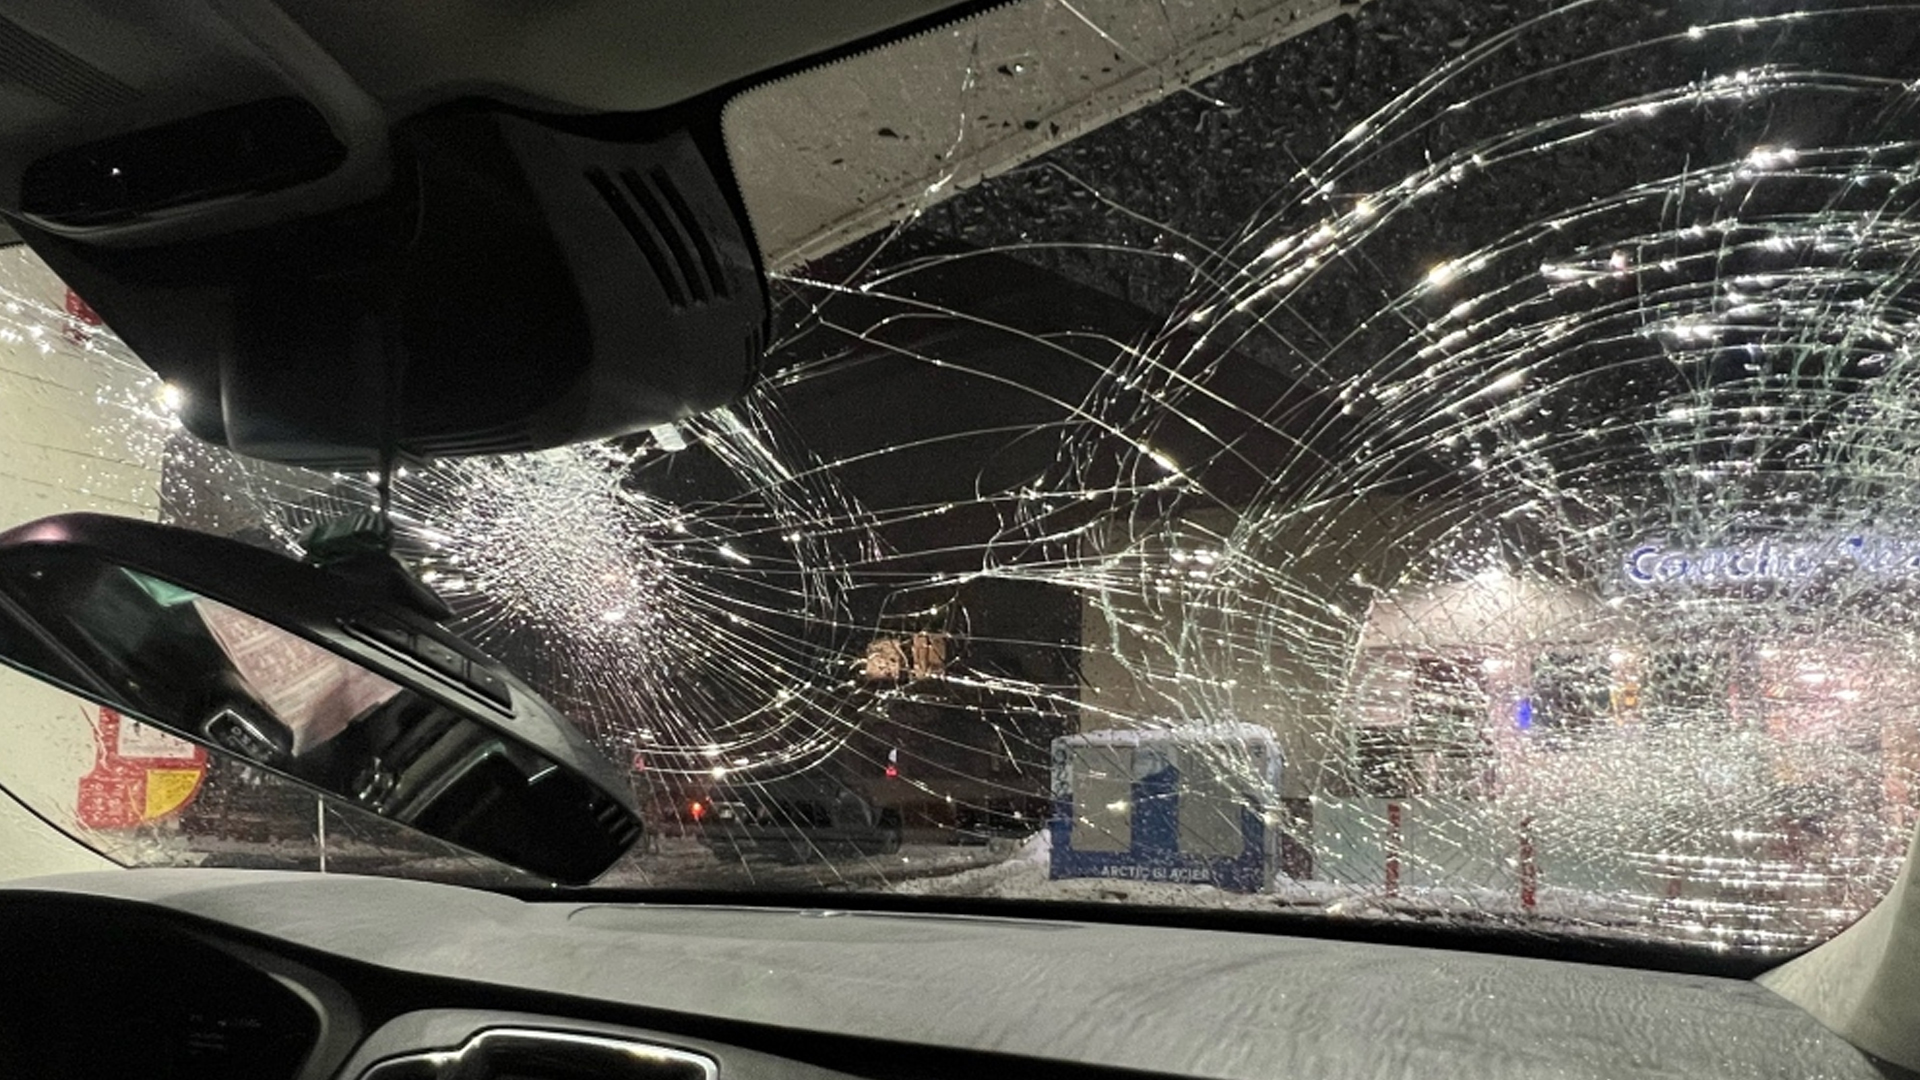 “Are we dead?”: Part of the road hits their windshield